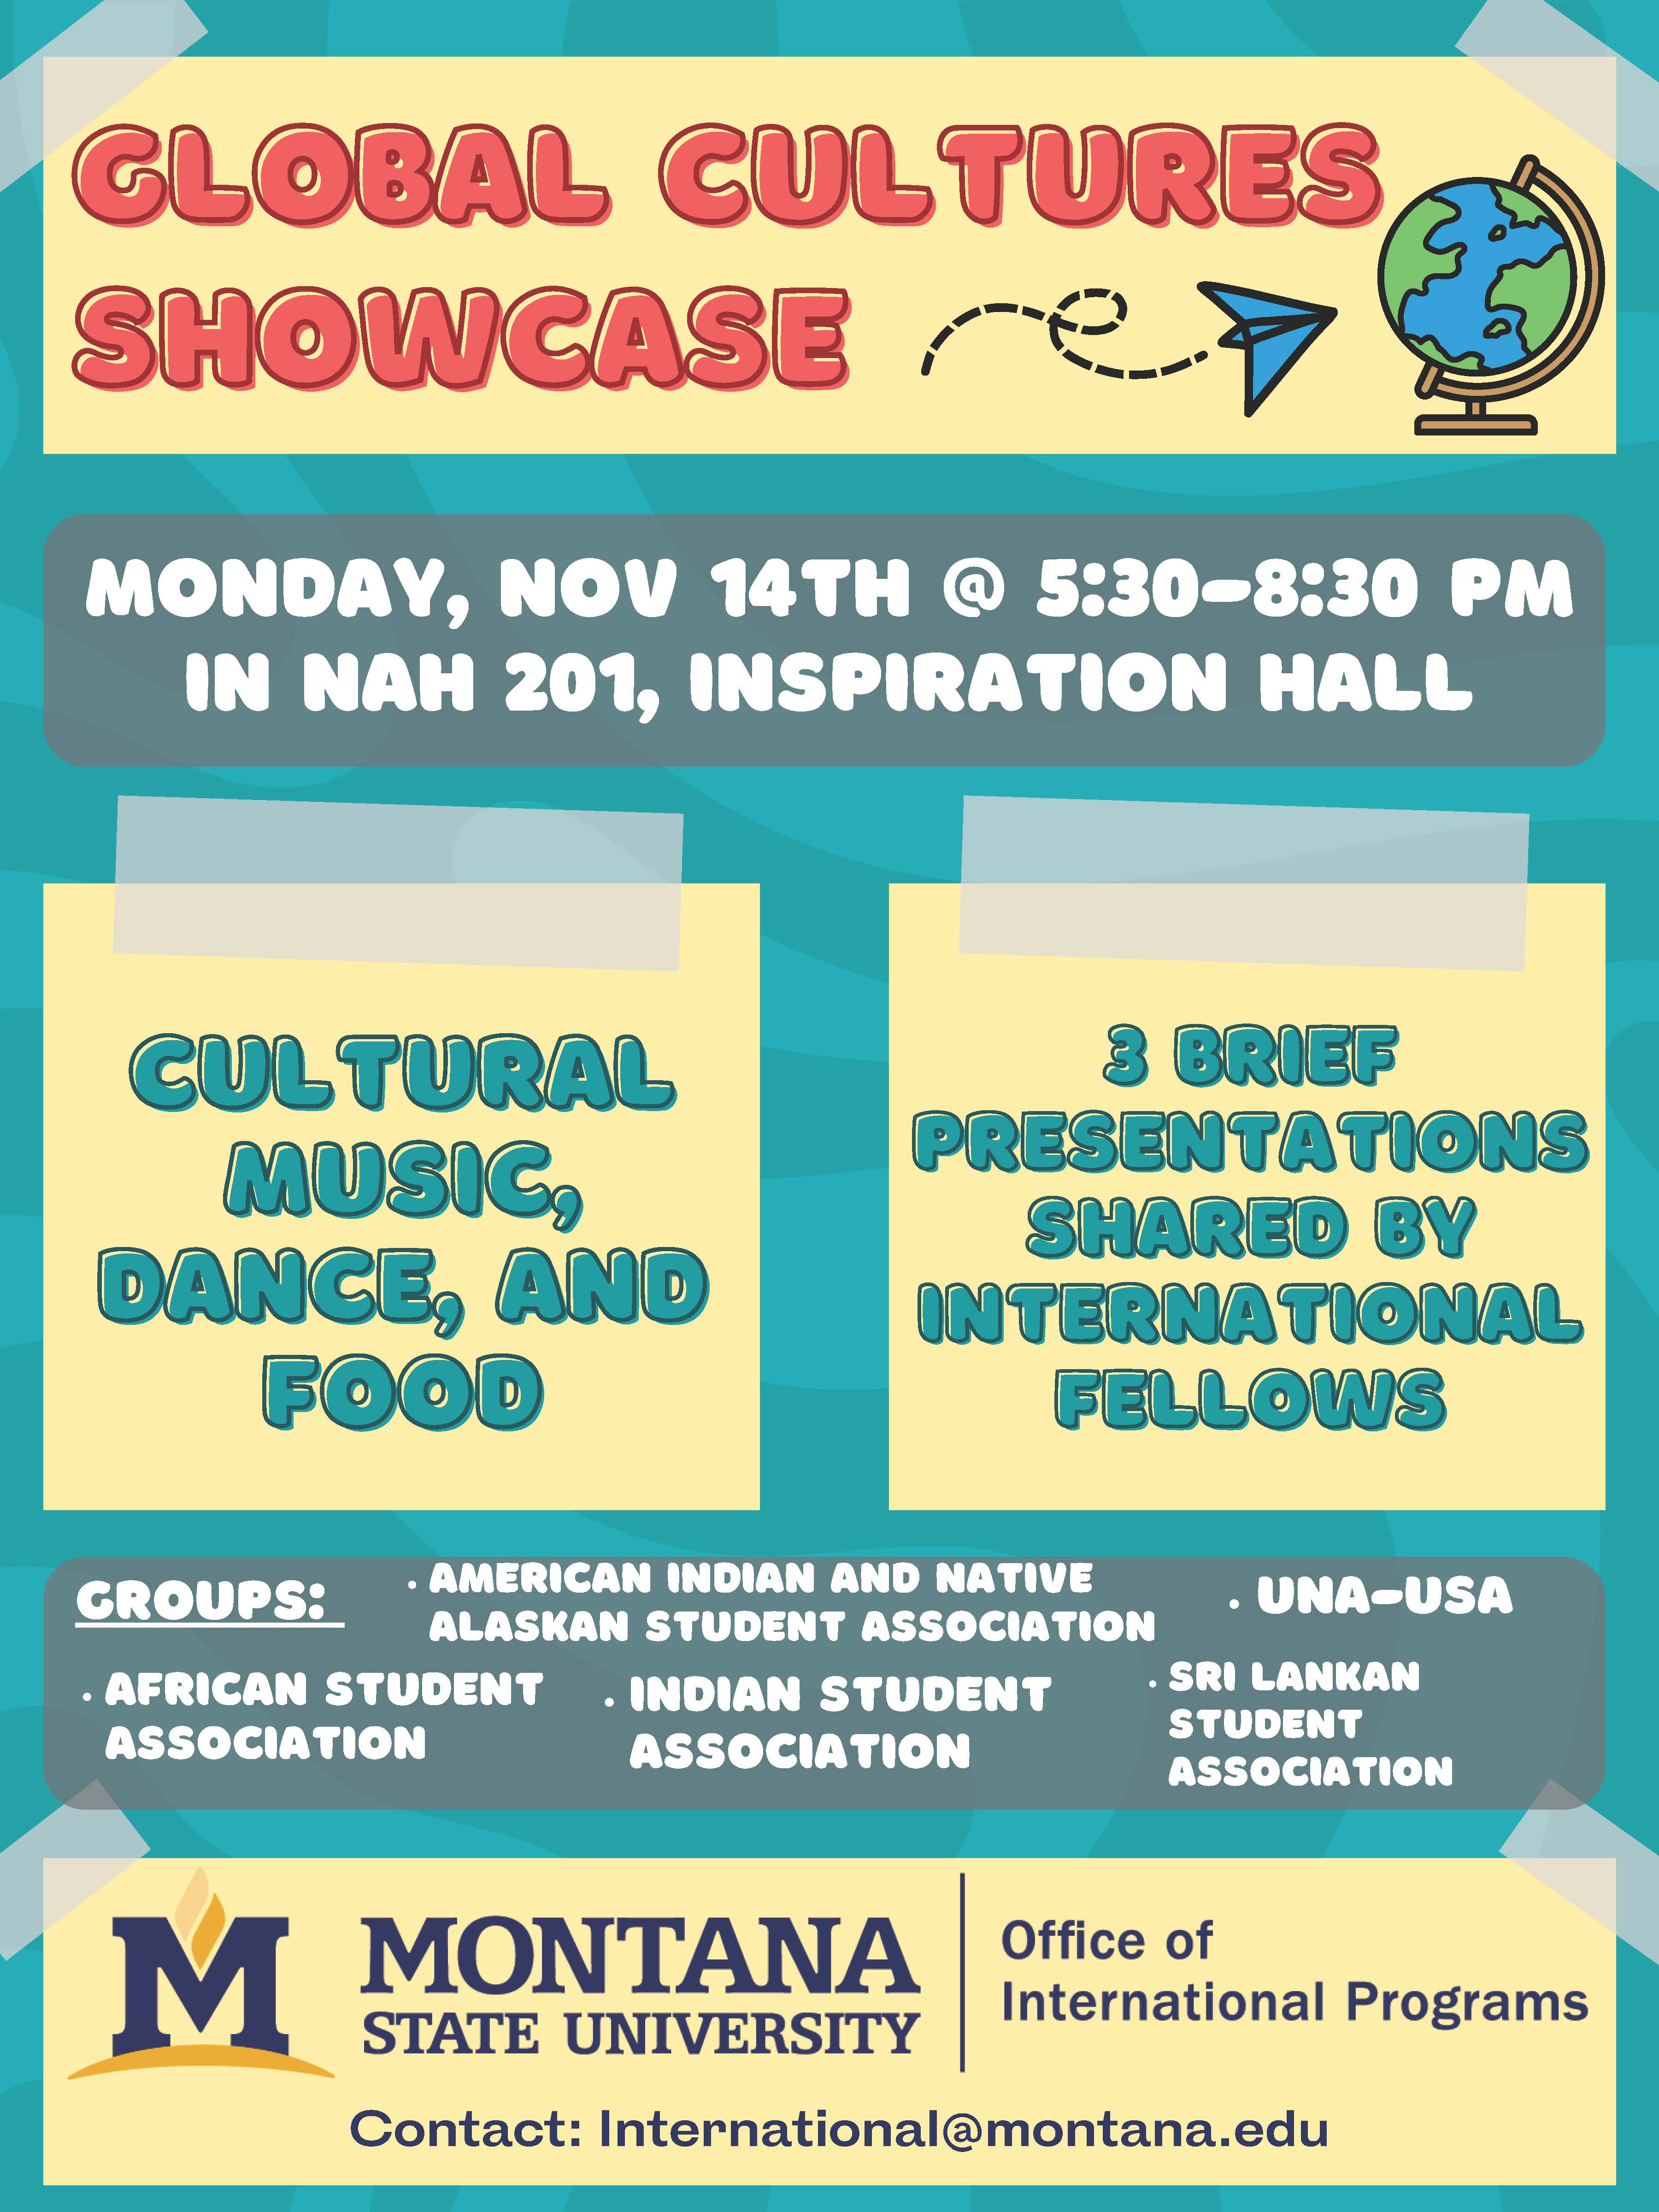 IEW2022 Global Cultures Showcase